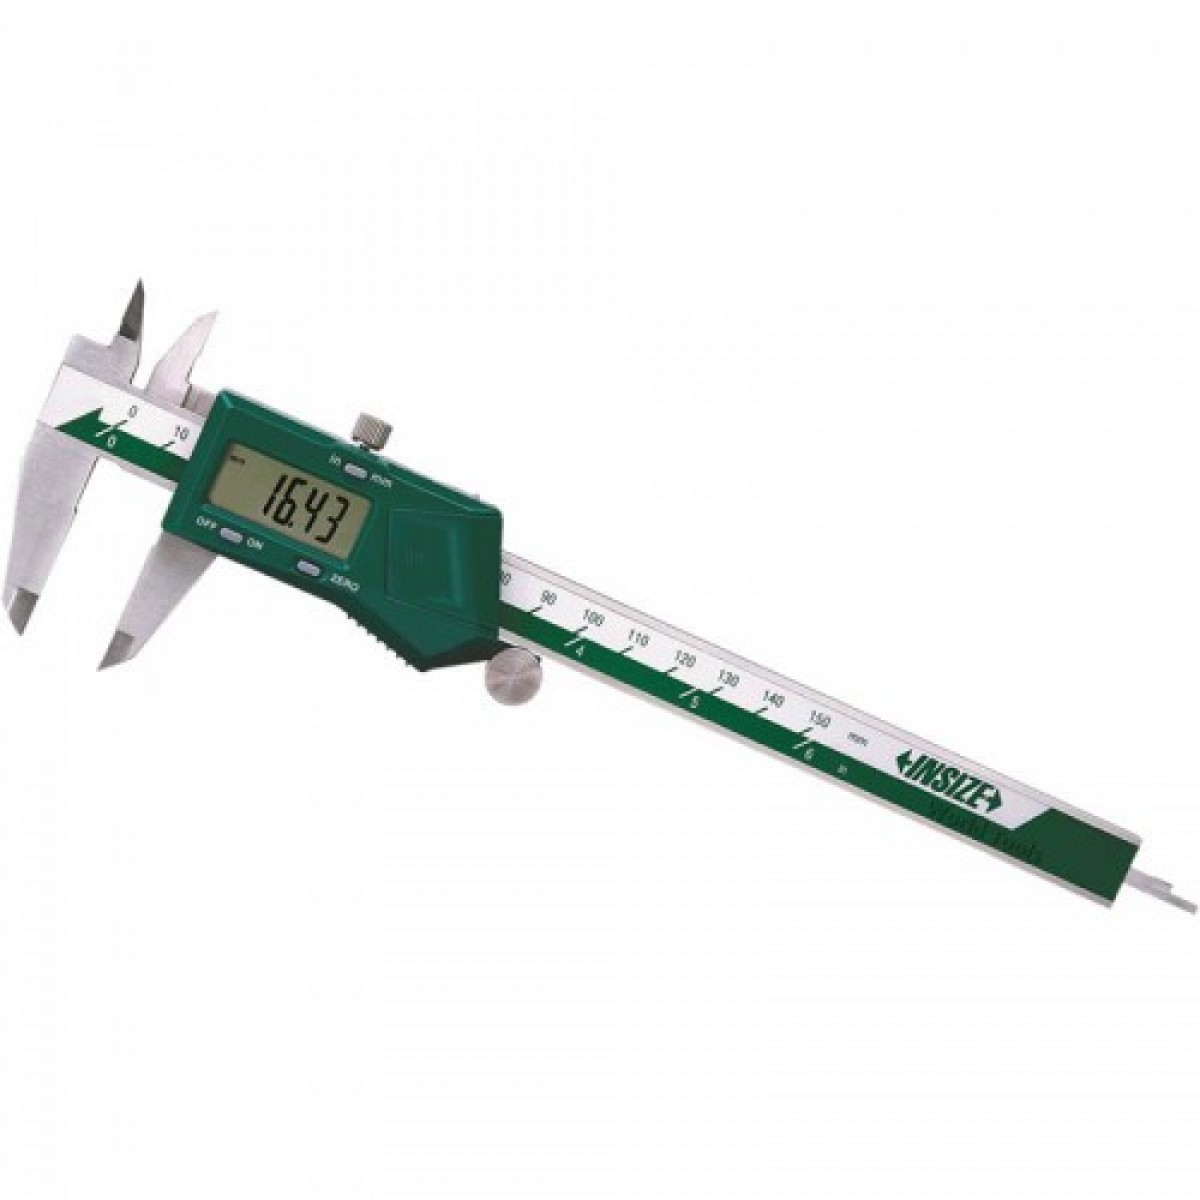 INSIZE 1108-150 ELECTRONIC CALIPER 150mm/6" - Click Image to Close